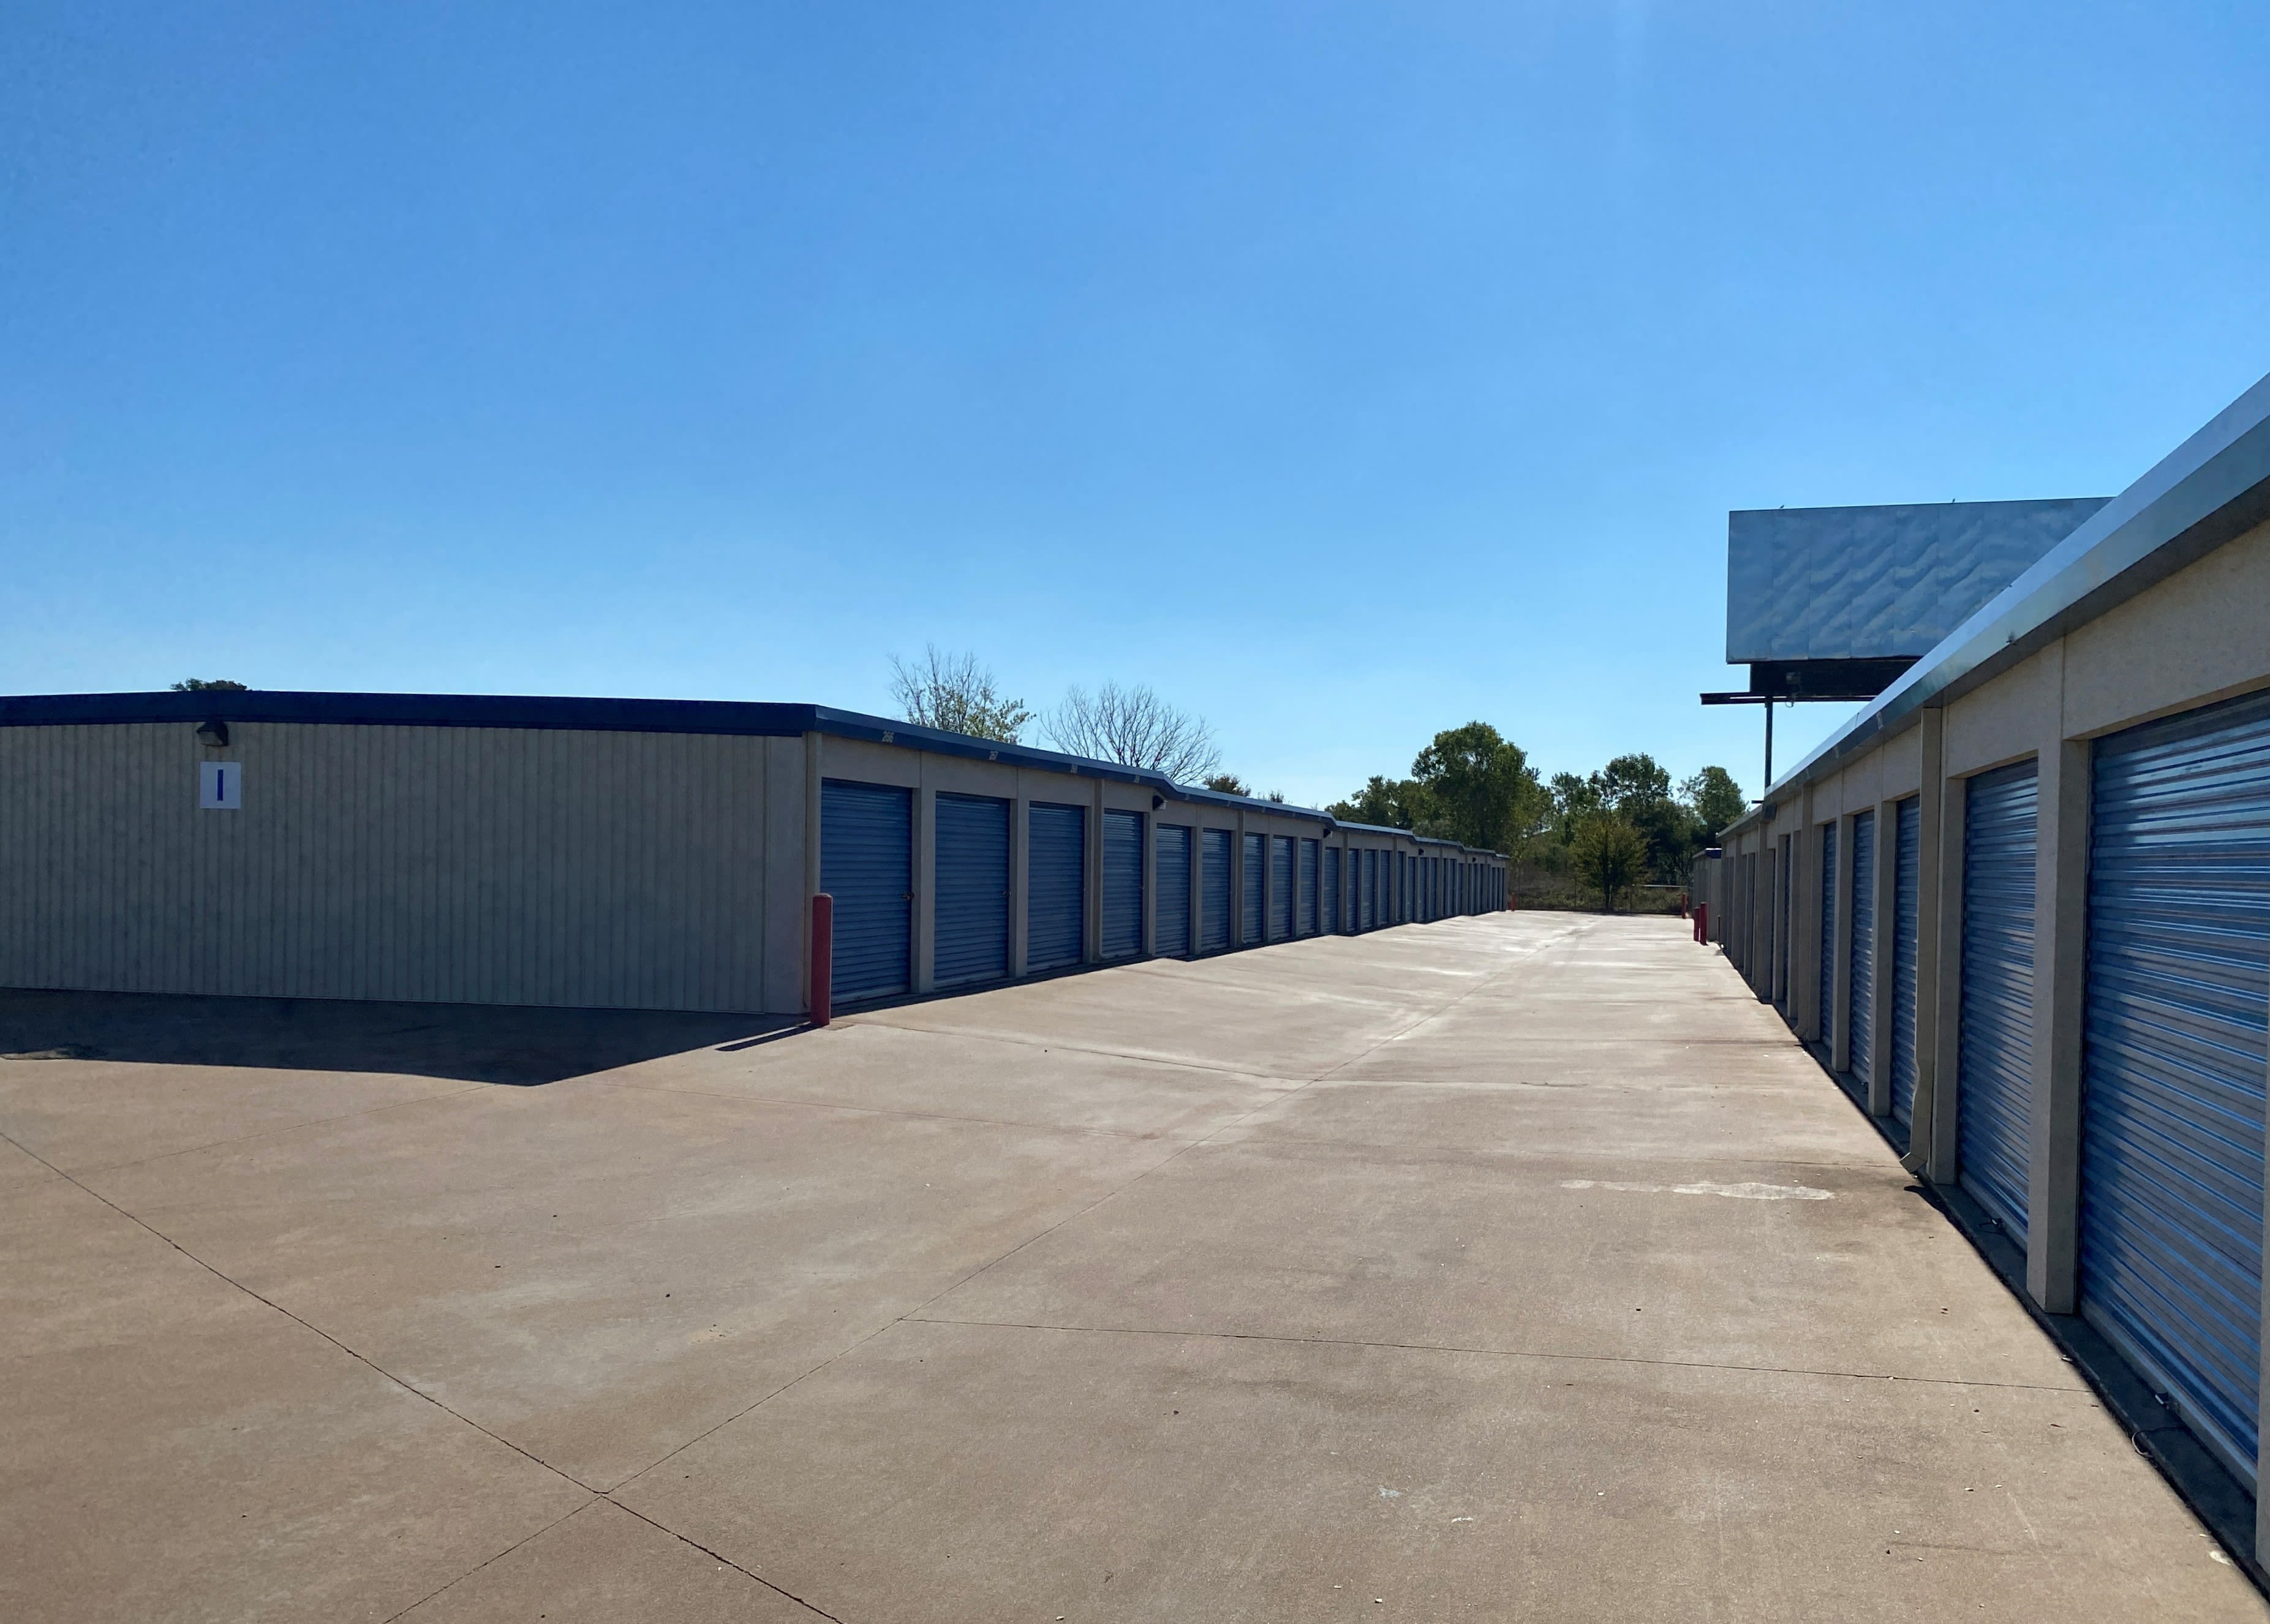 View our hours and directions at KO Storage of Wichita Falls - North in Wichita Falls, Texas